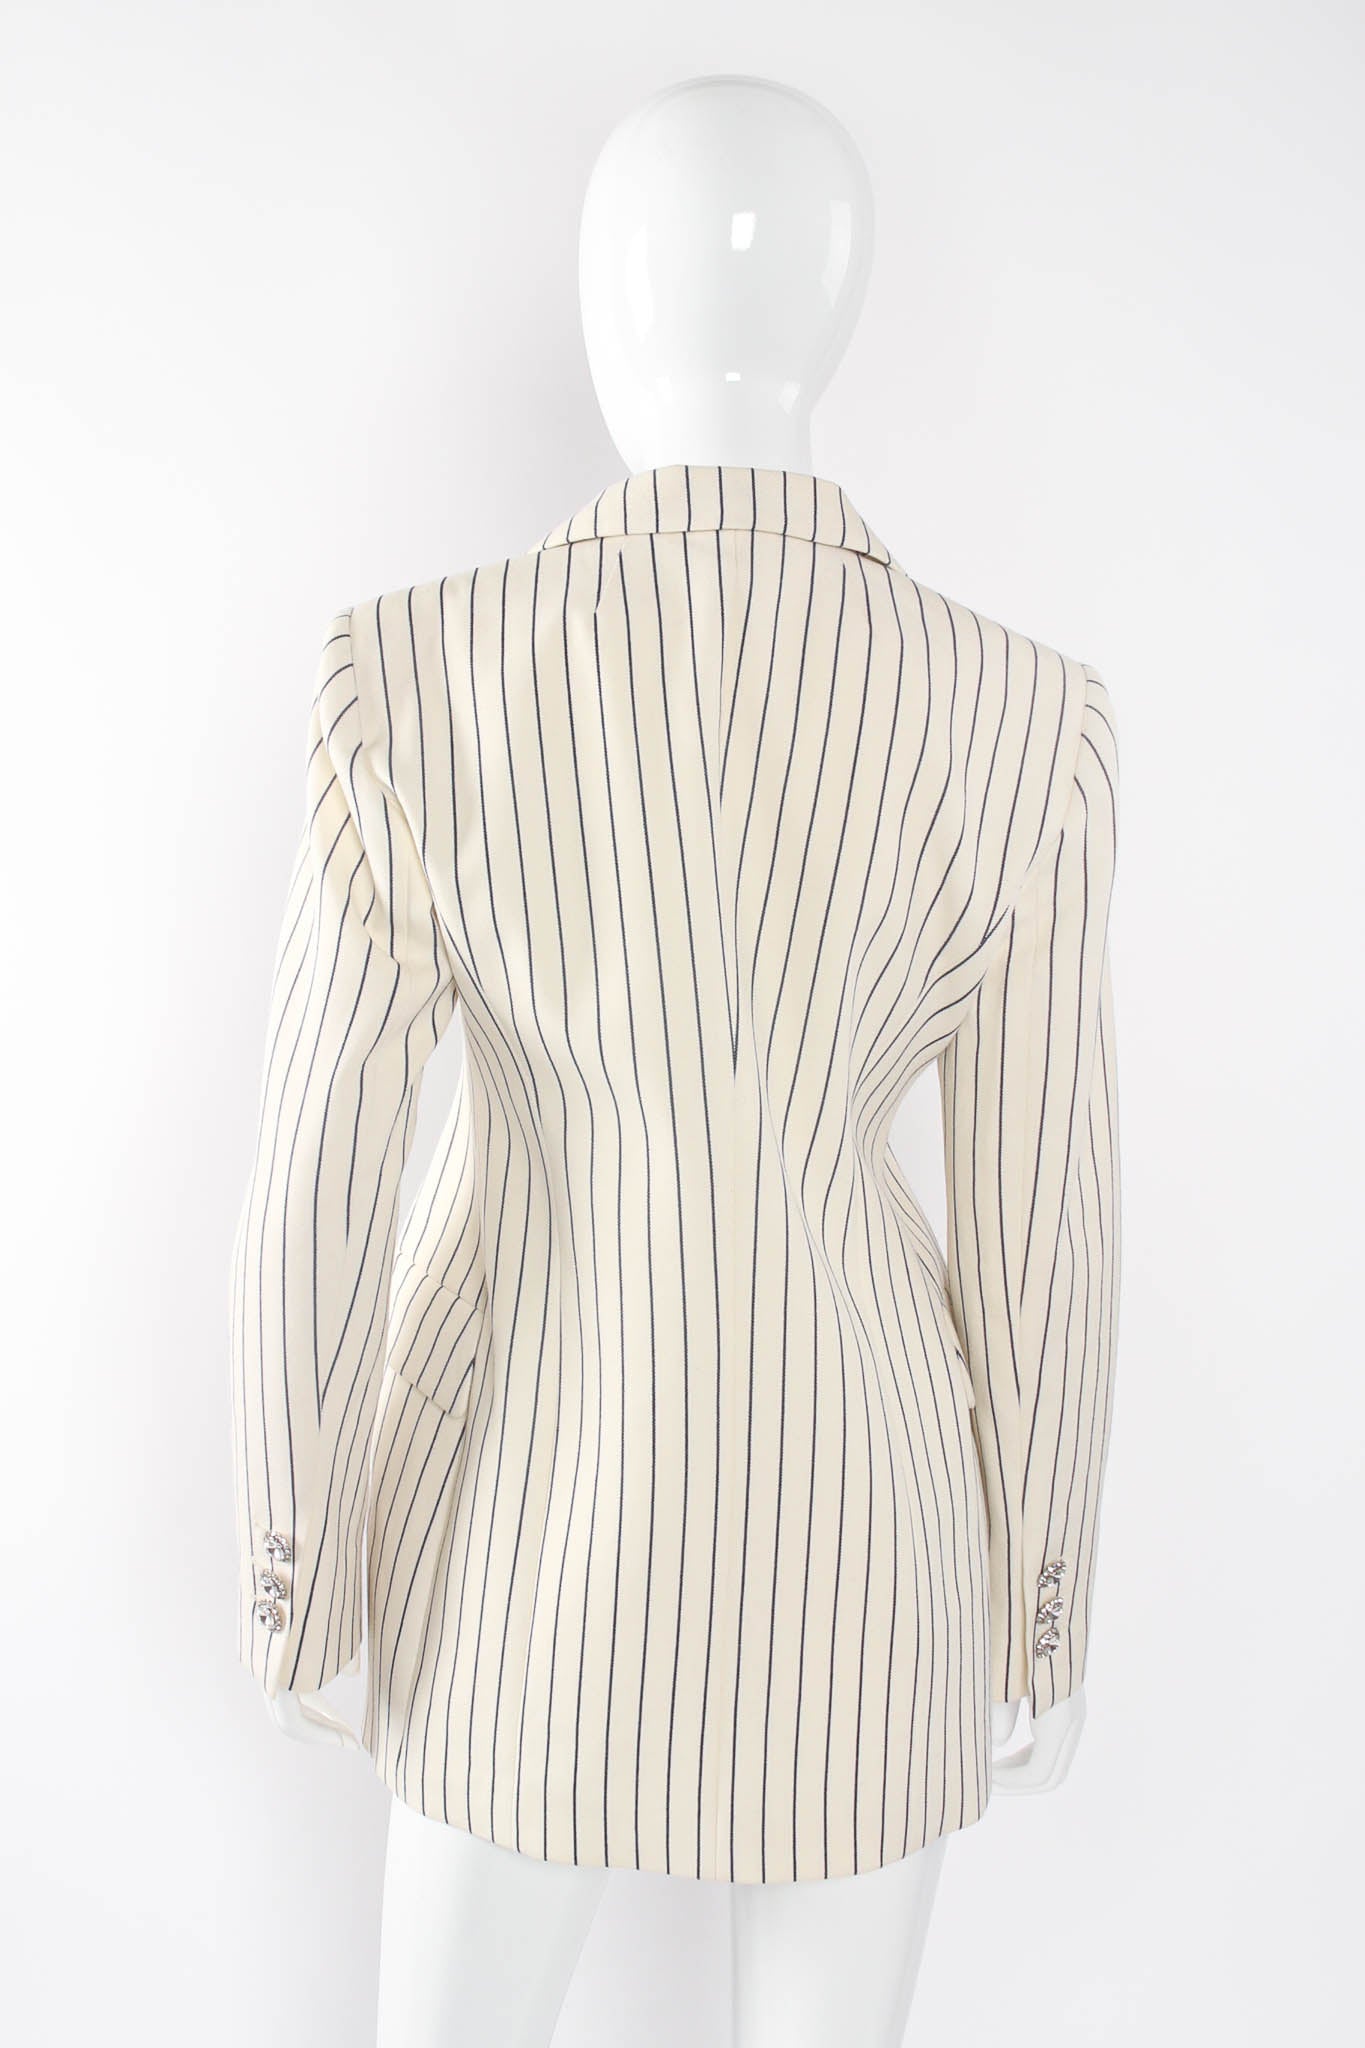 2019 S/S Alessandra Rich Rope Stripe Jacket Set on mannequin back at Recess Los Angeles